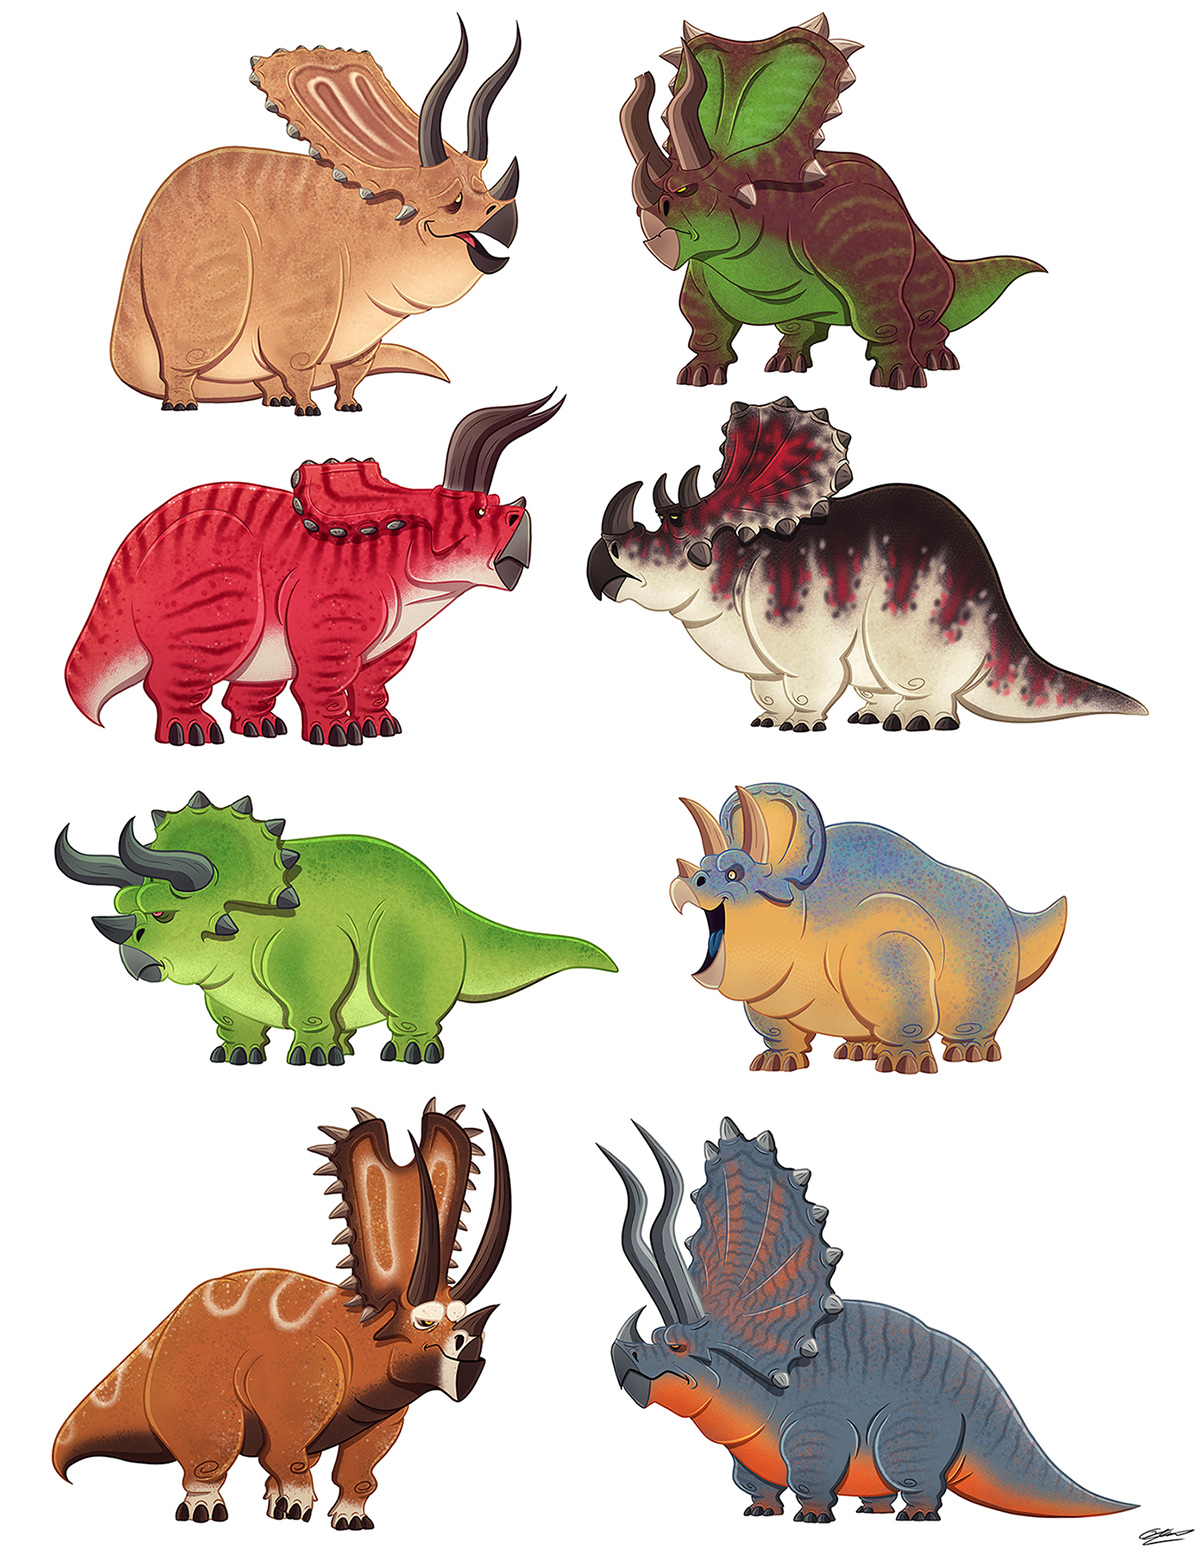 Character design Dinosaur dinos character concept ceratopsians triceratops sketches cartoon olivier silven